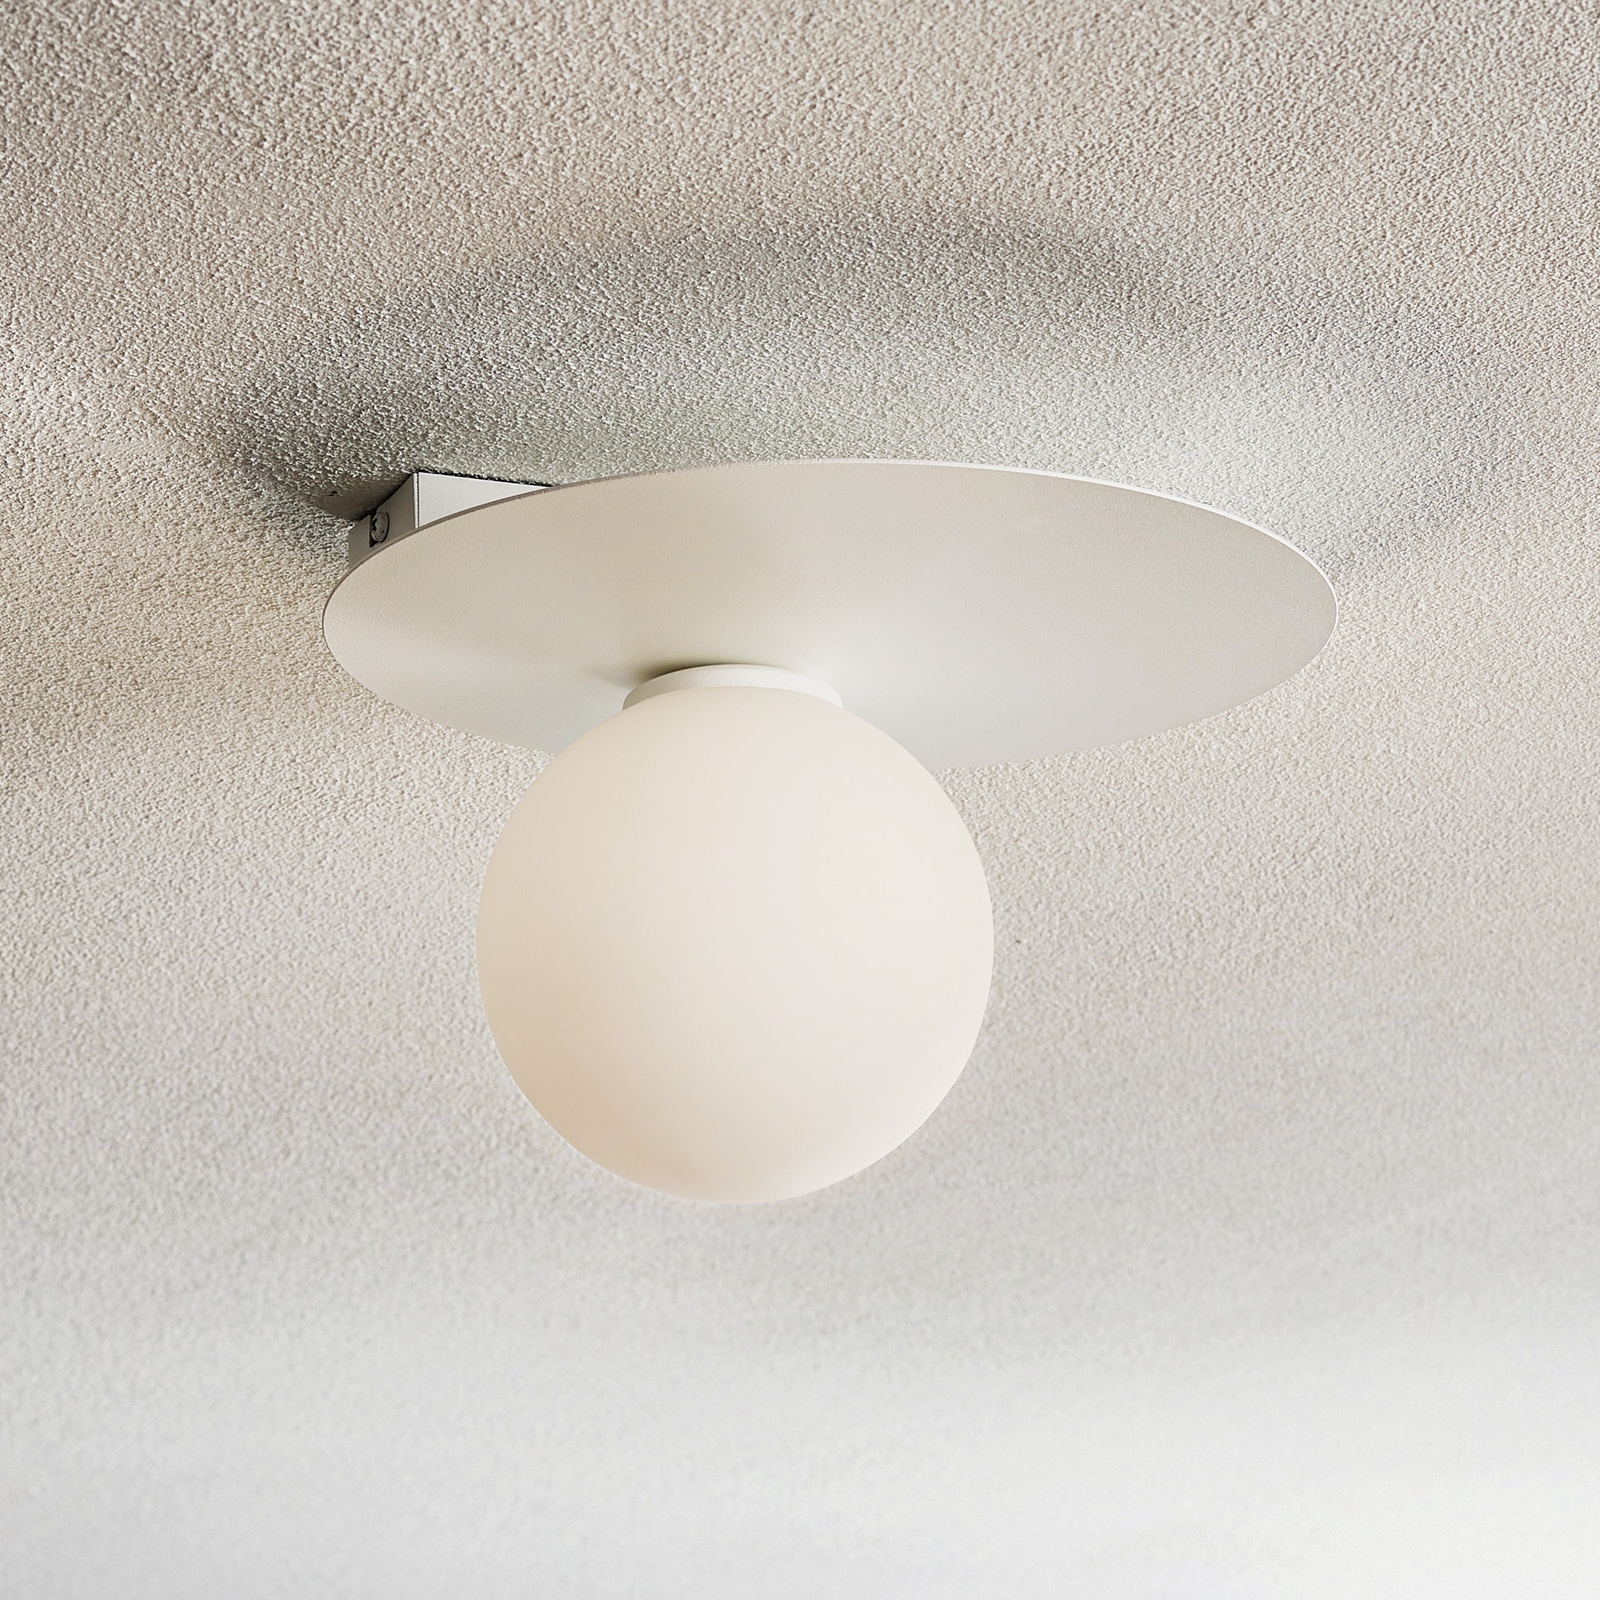 Firn ceiling light, round, one-bulb, white